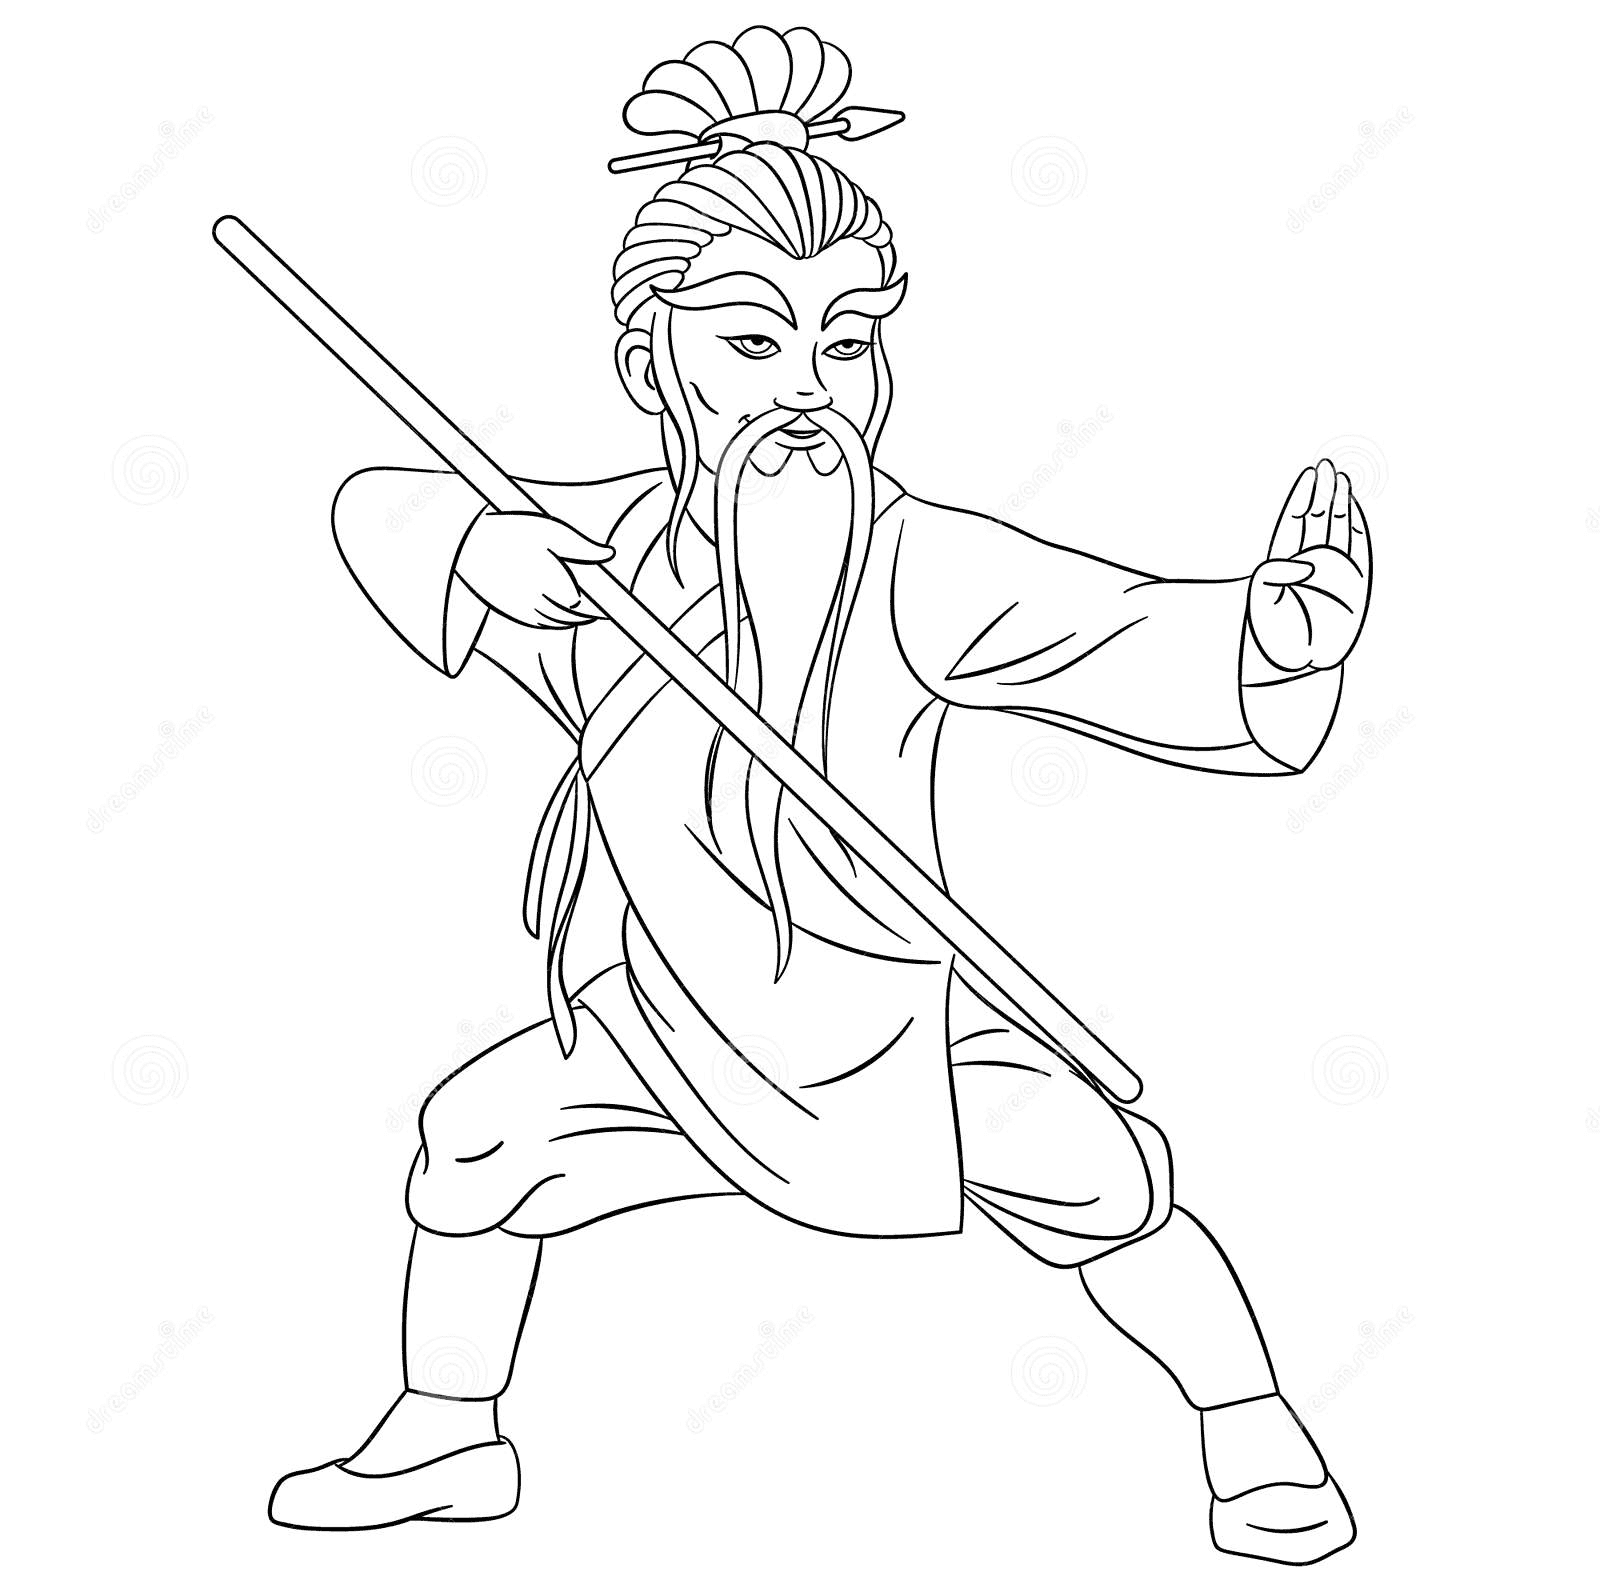 Coloring Page With Shaolin Monk Fighting Coloring Page